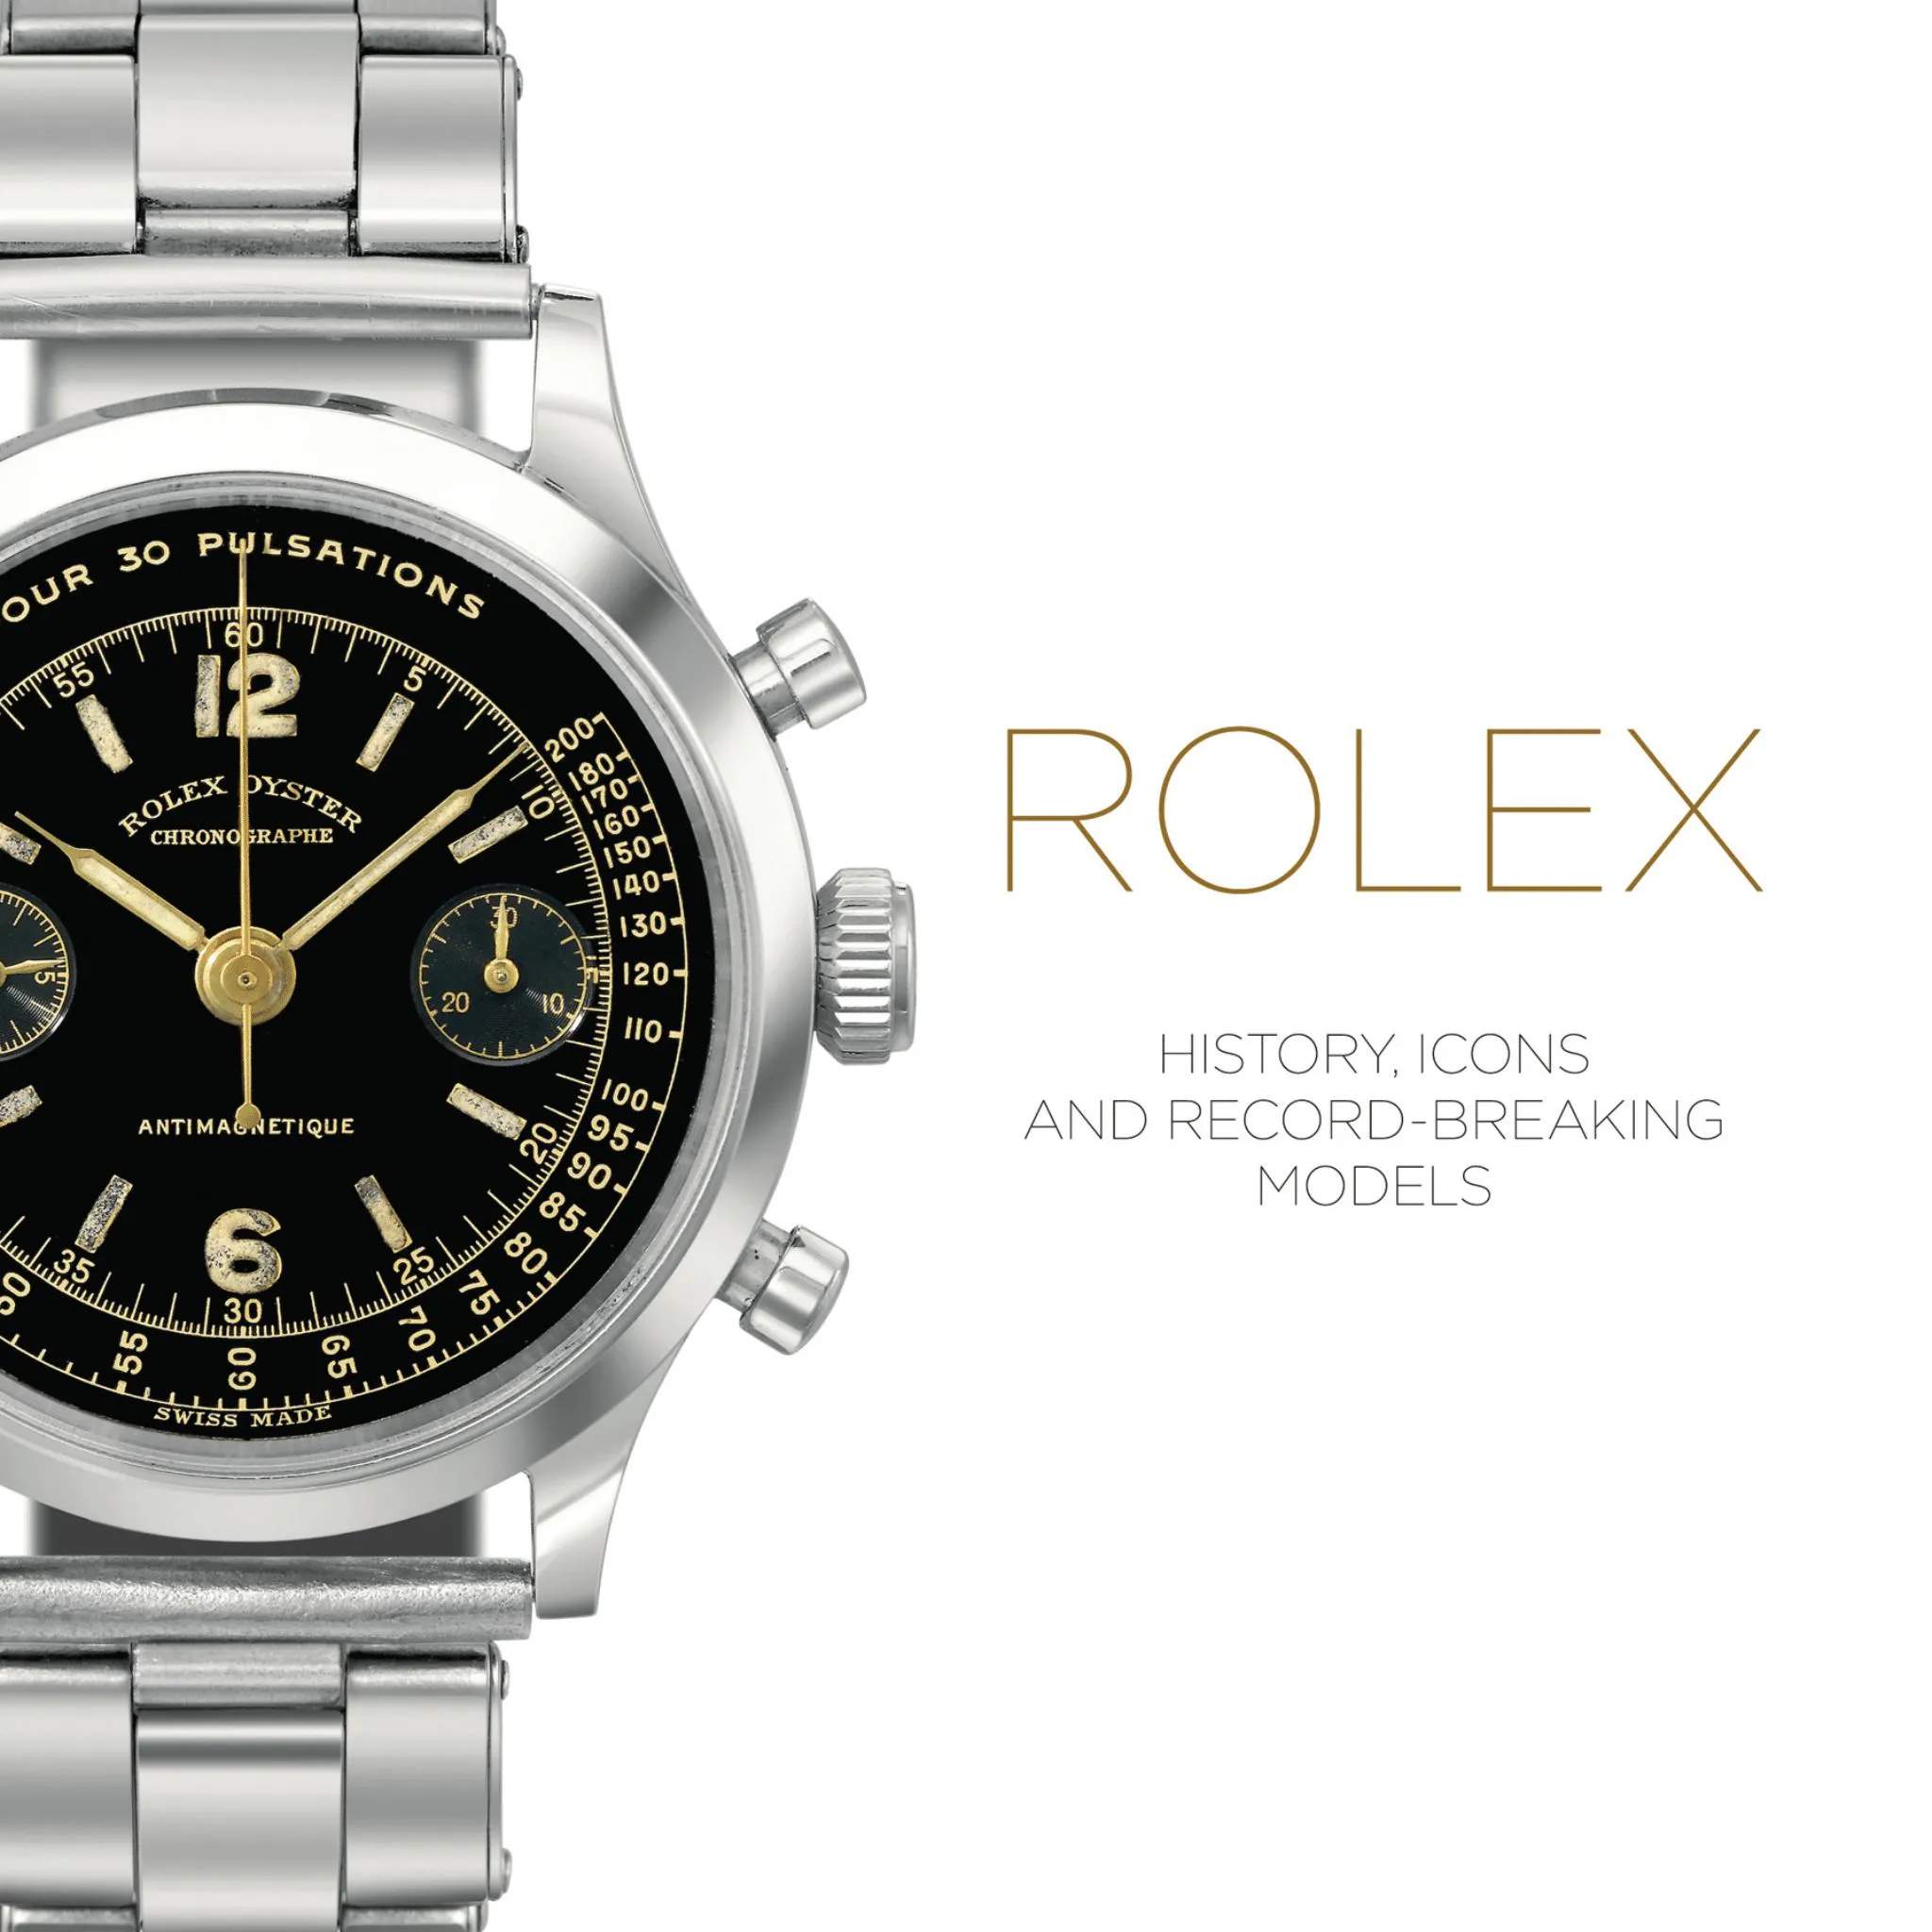 Rolex History, Icons and Record-Breaking Models - Af Mara Cappelletti & Osvaldo Patrizzi coffee table books